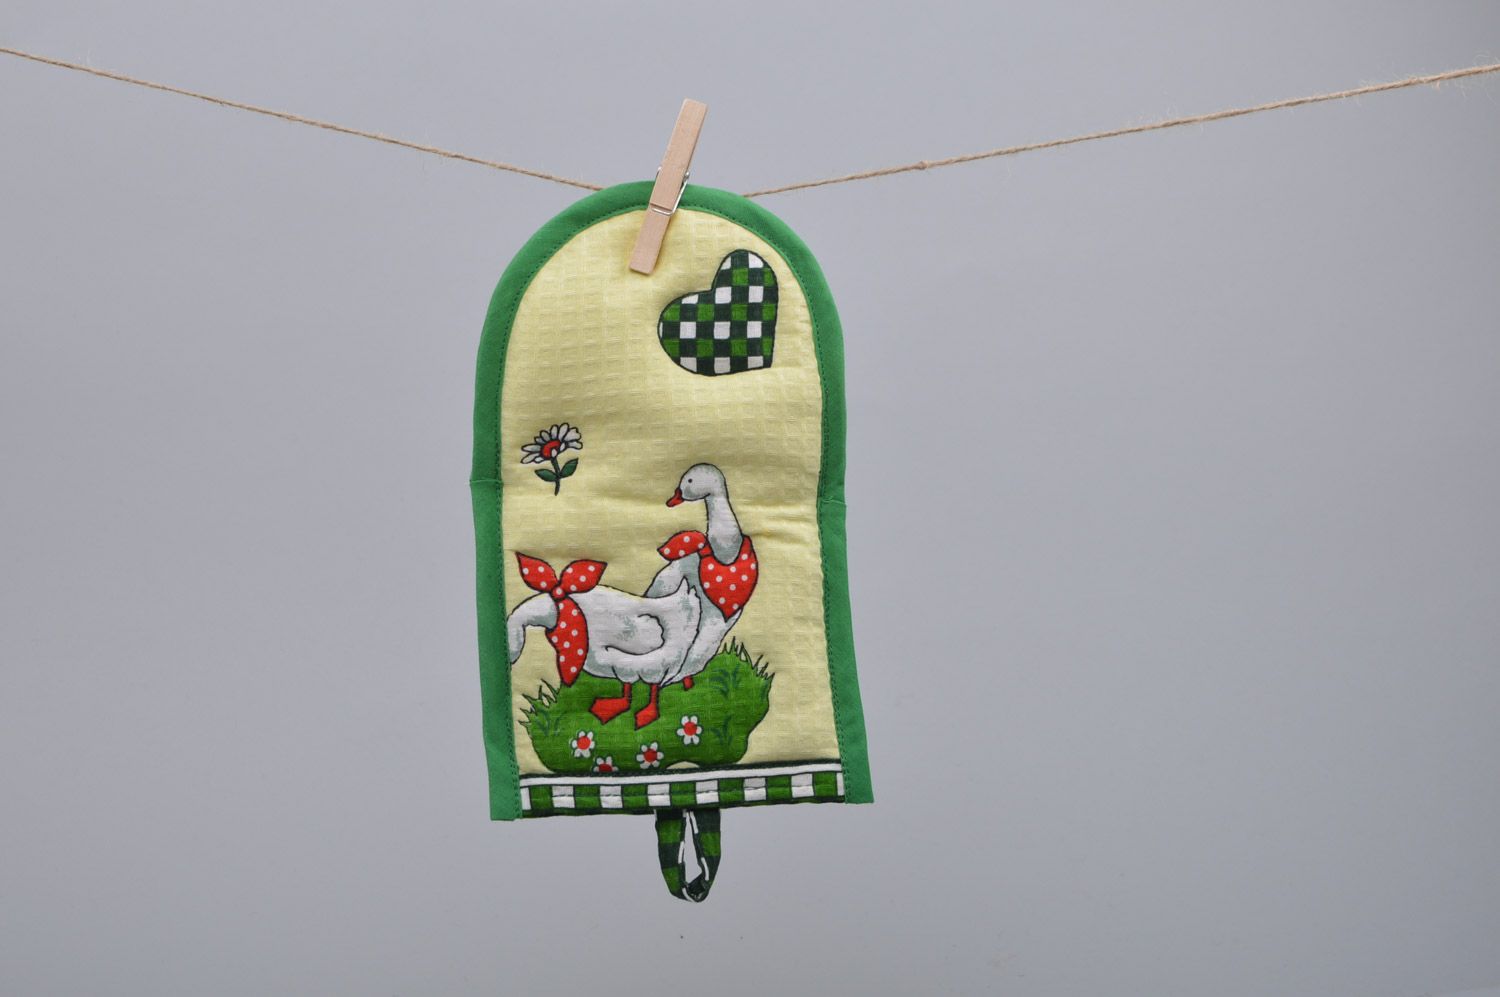 Cute handmade oven mitten sewn of colorful cotton fabric with geese image   photo 5